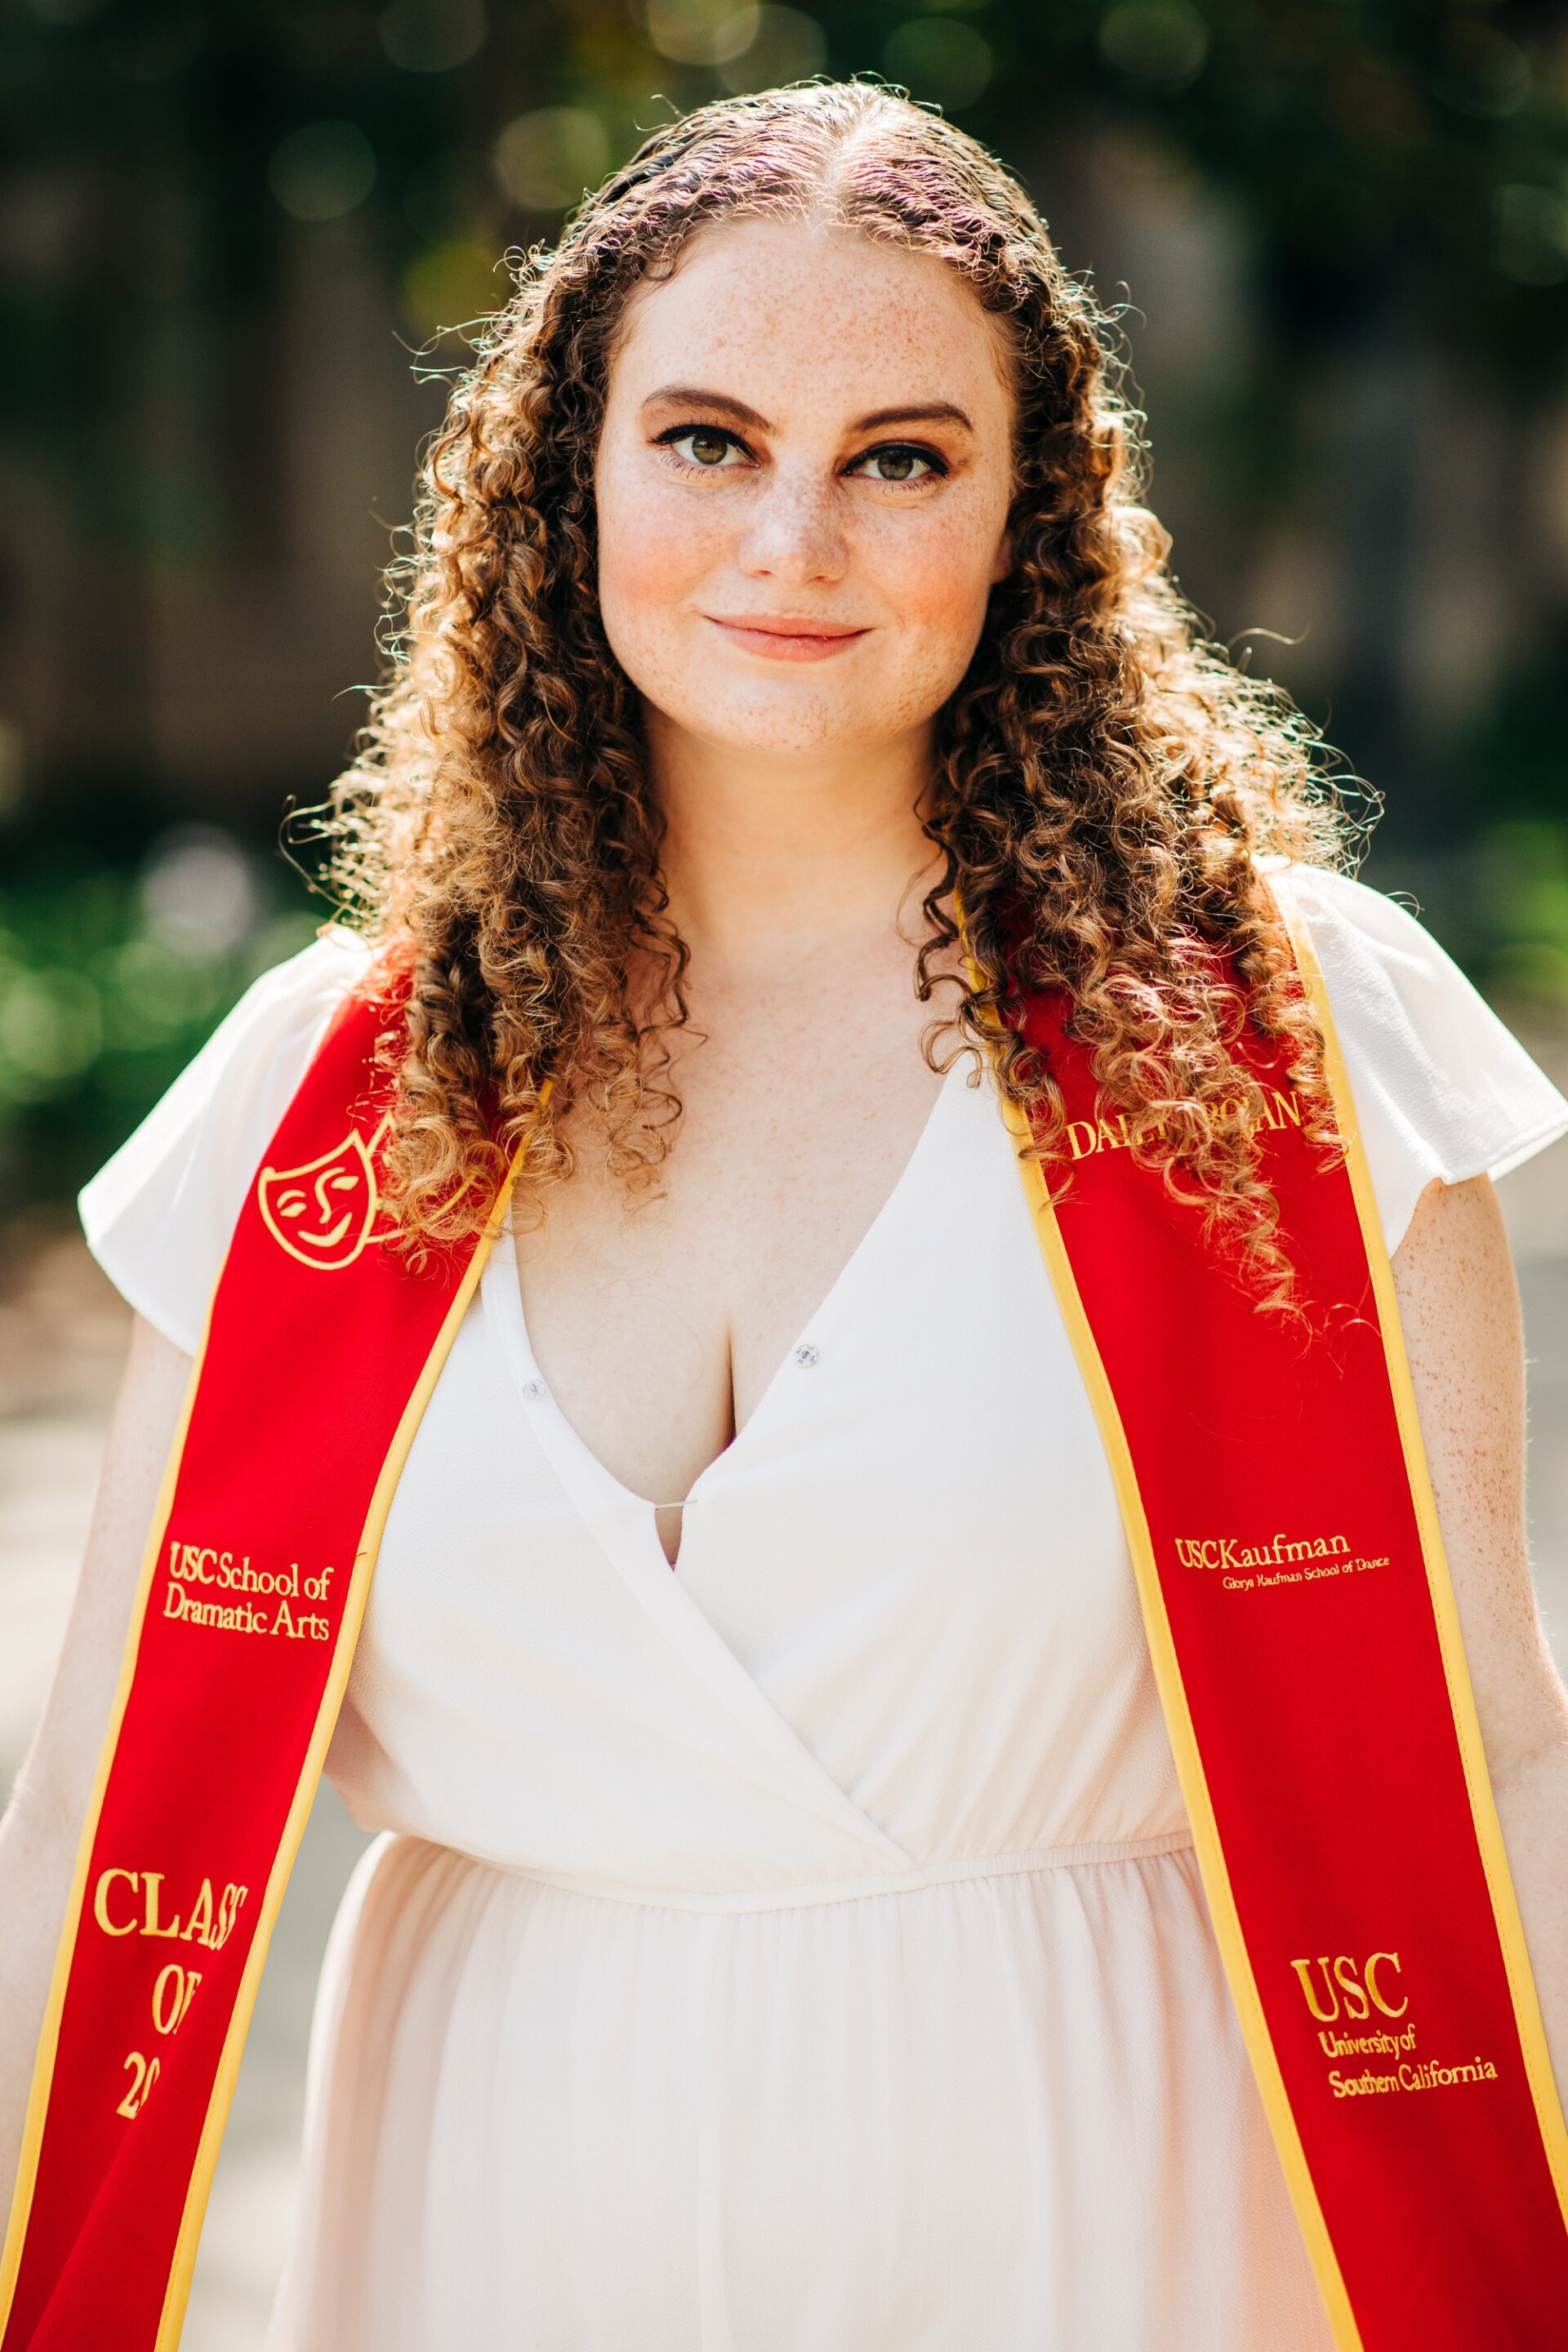 Portrait of a young woman with curly hair and a red graduation stole reading 